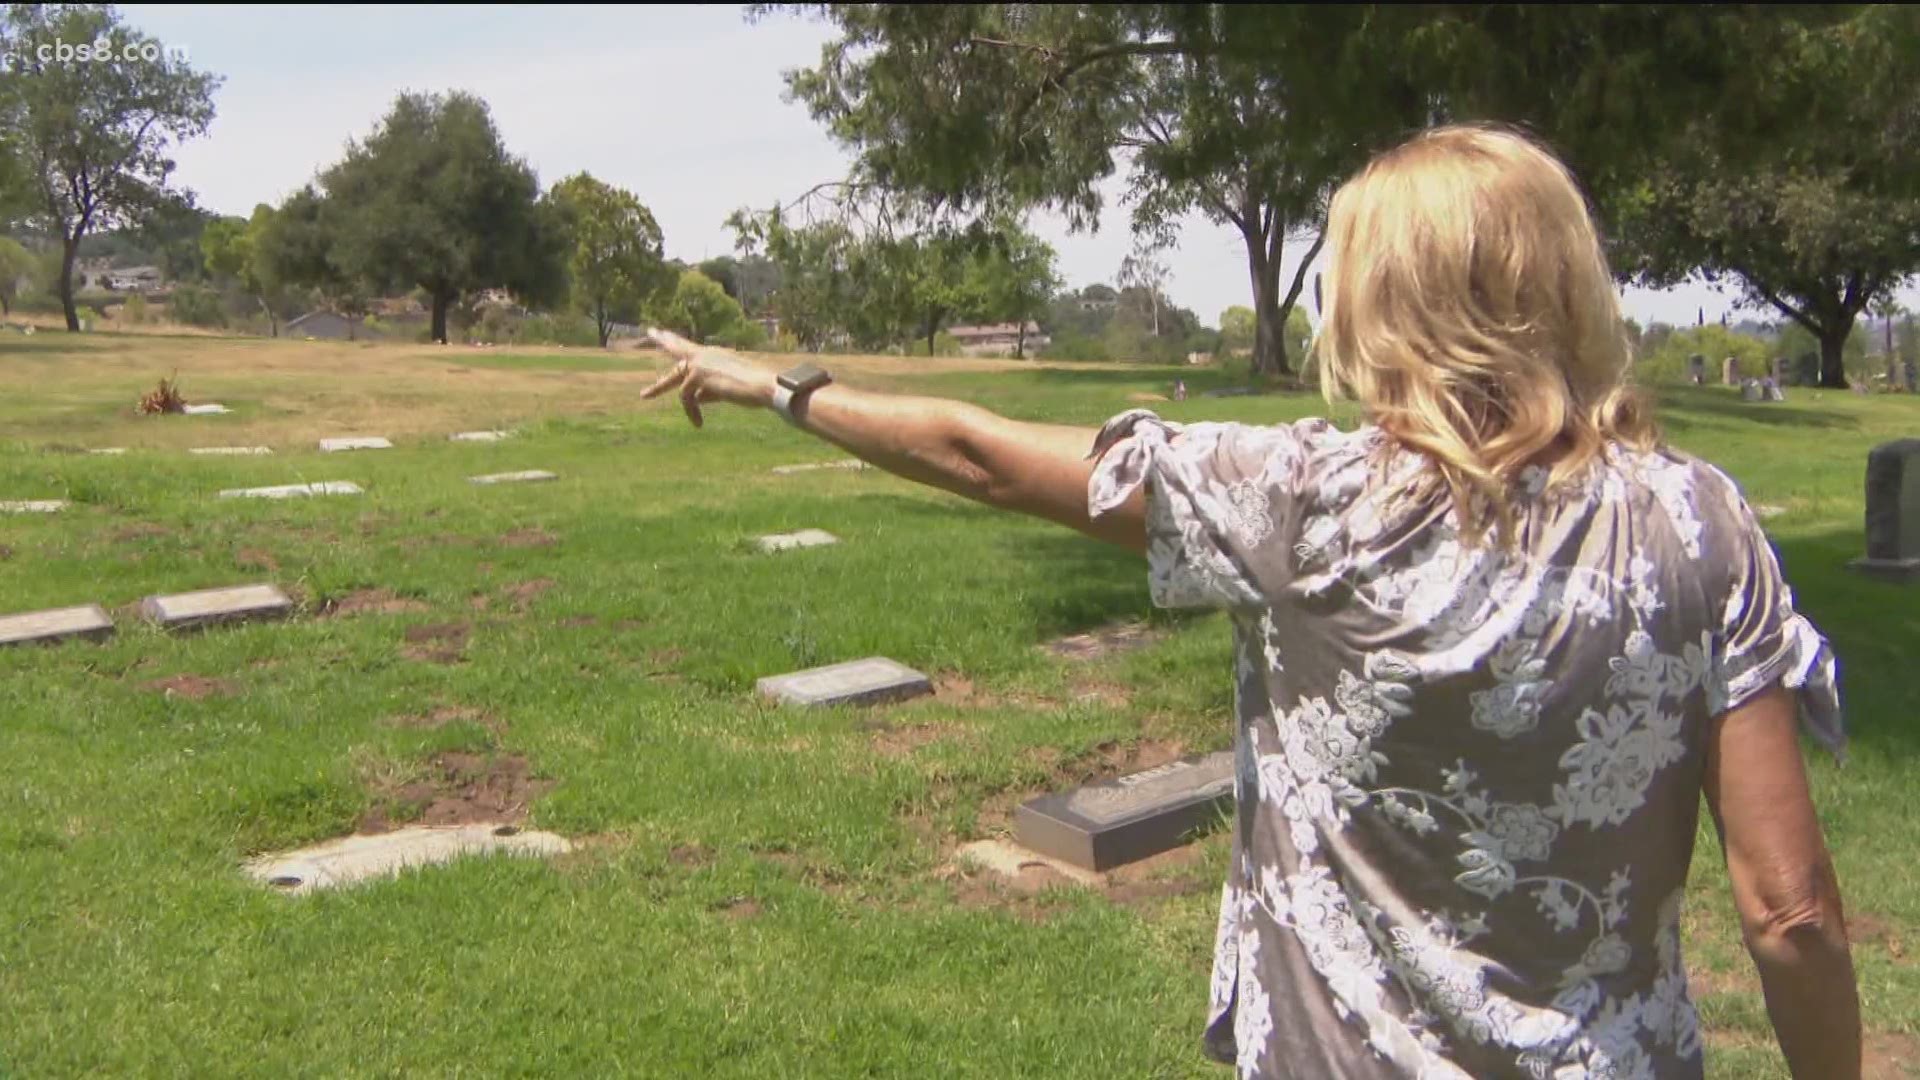 A North County family is concerned that a local cemetery is in disarray. They say multiple graves are covered in dirt, including those of military service members.